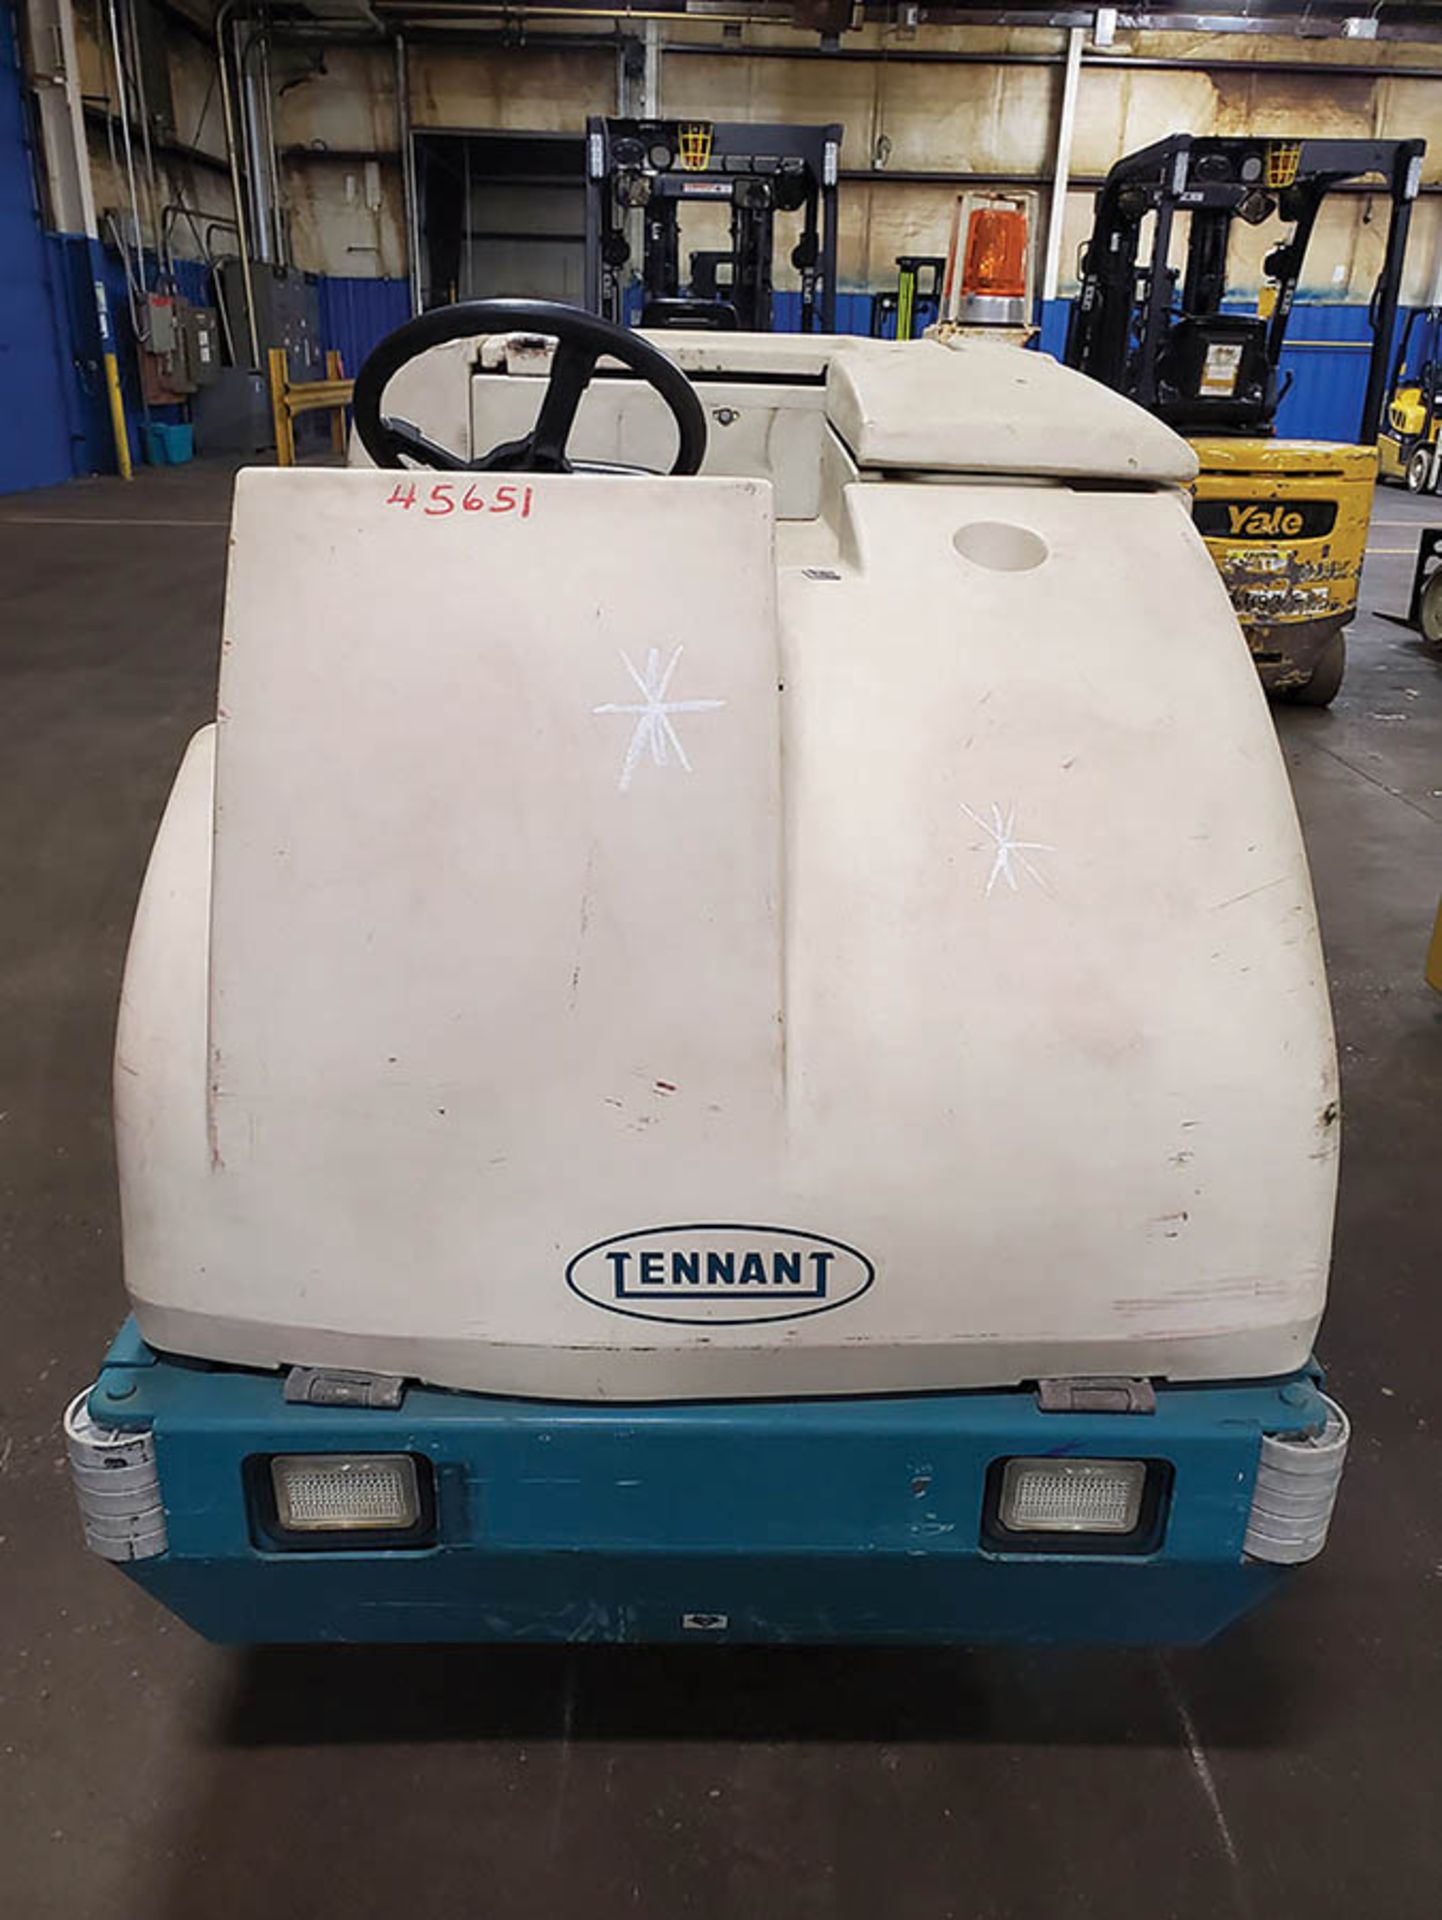 TENNANT RIDING FLOOR SCRUBBER, MODEL: 7300, S/N: 7300-1900, 36-VOLT, GVWT: 4,580, 1,297 HOURS - Image 7 of 15